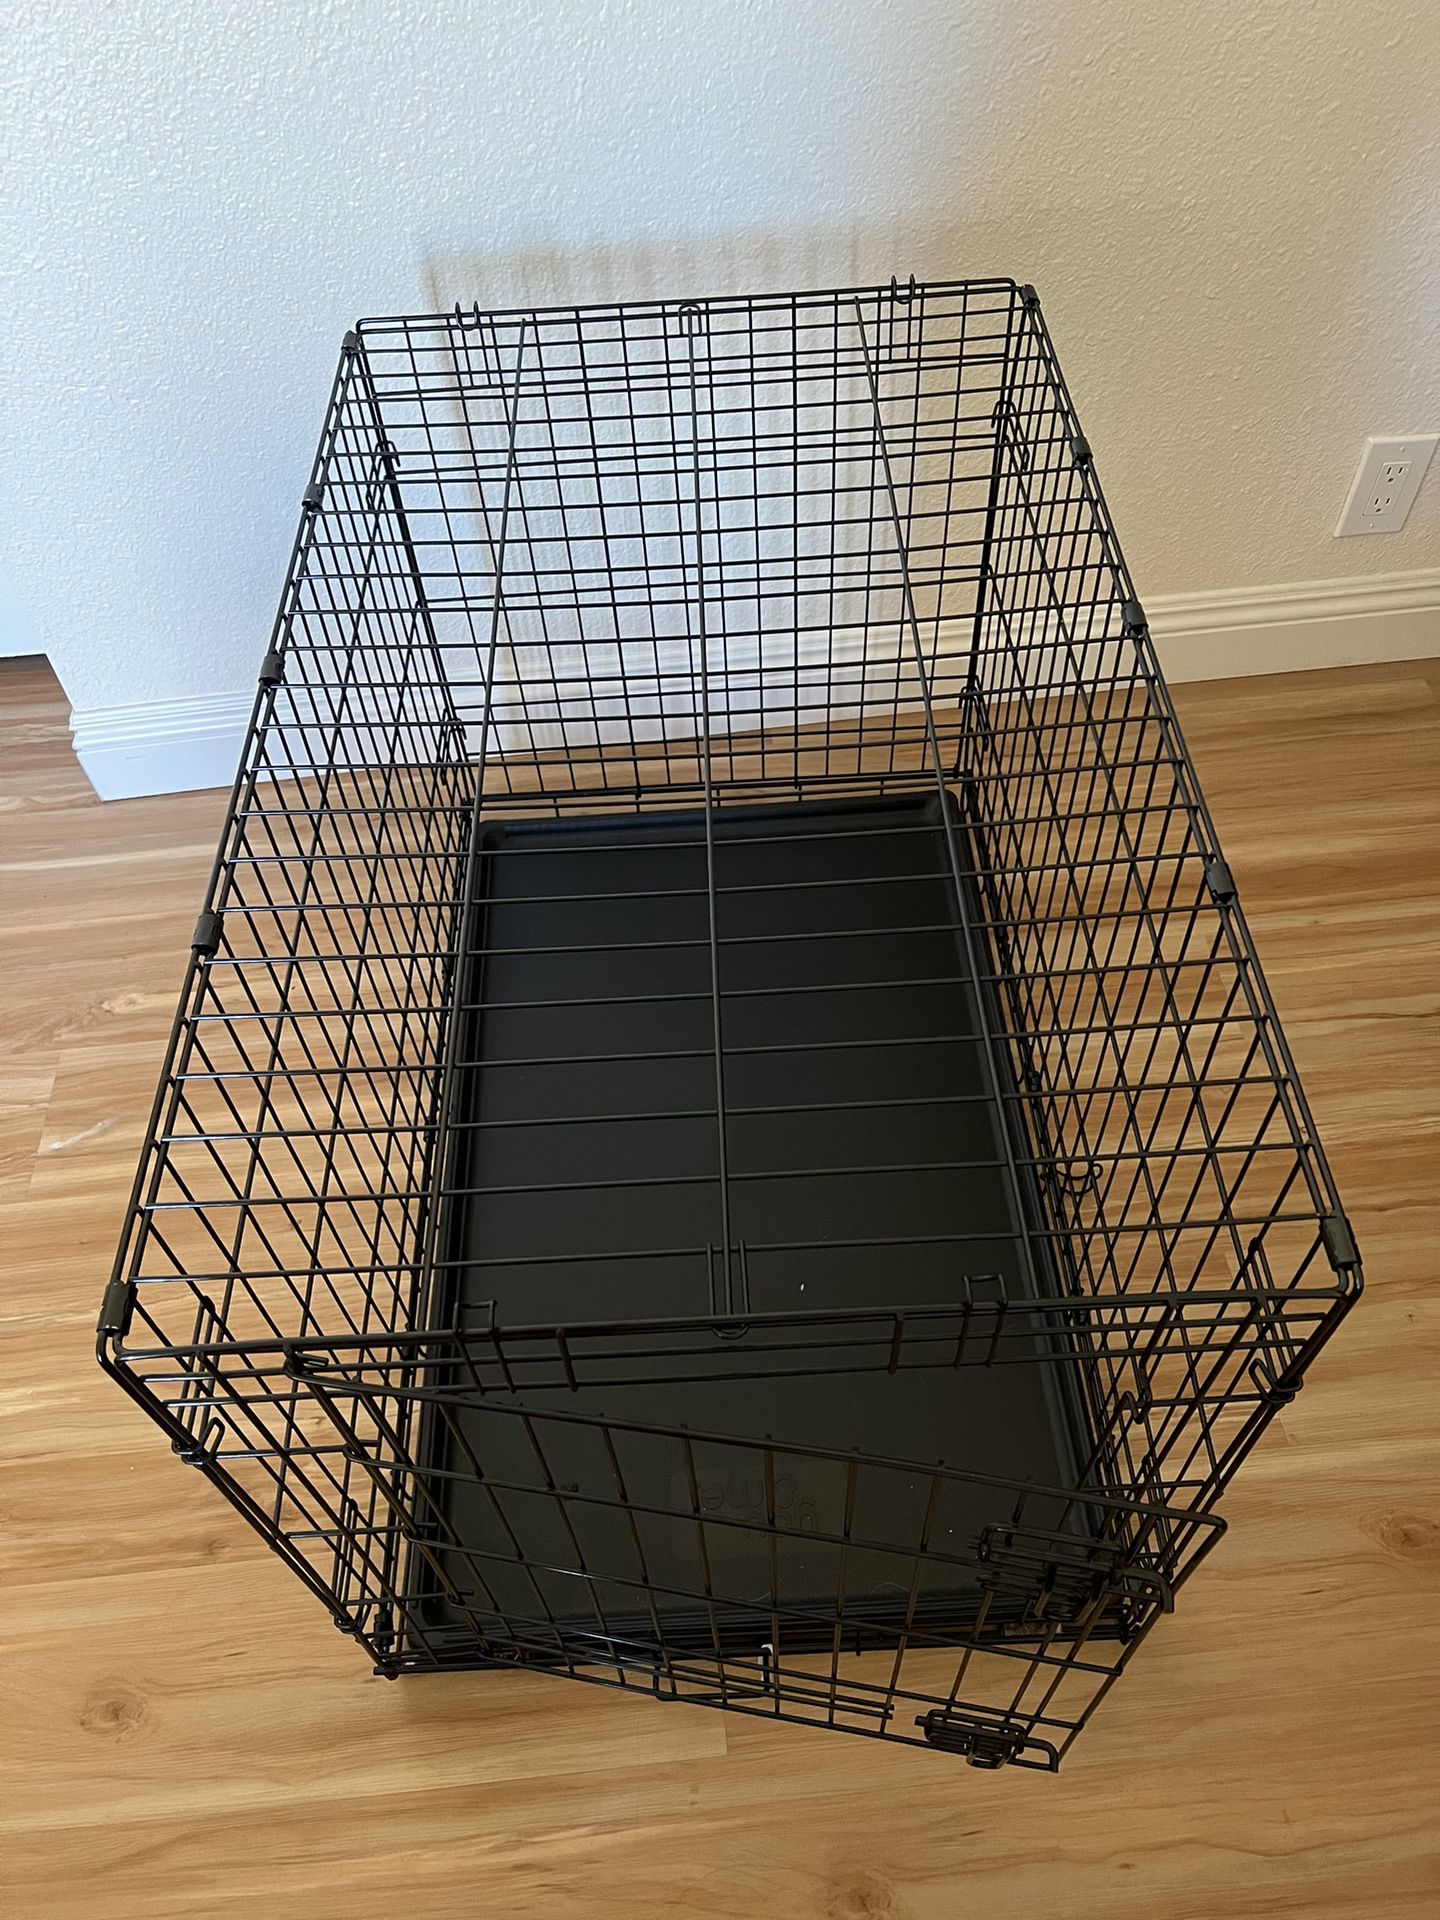 Large Dog Crate- Heavy Duty 